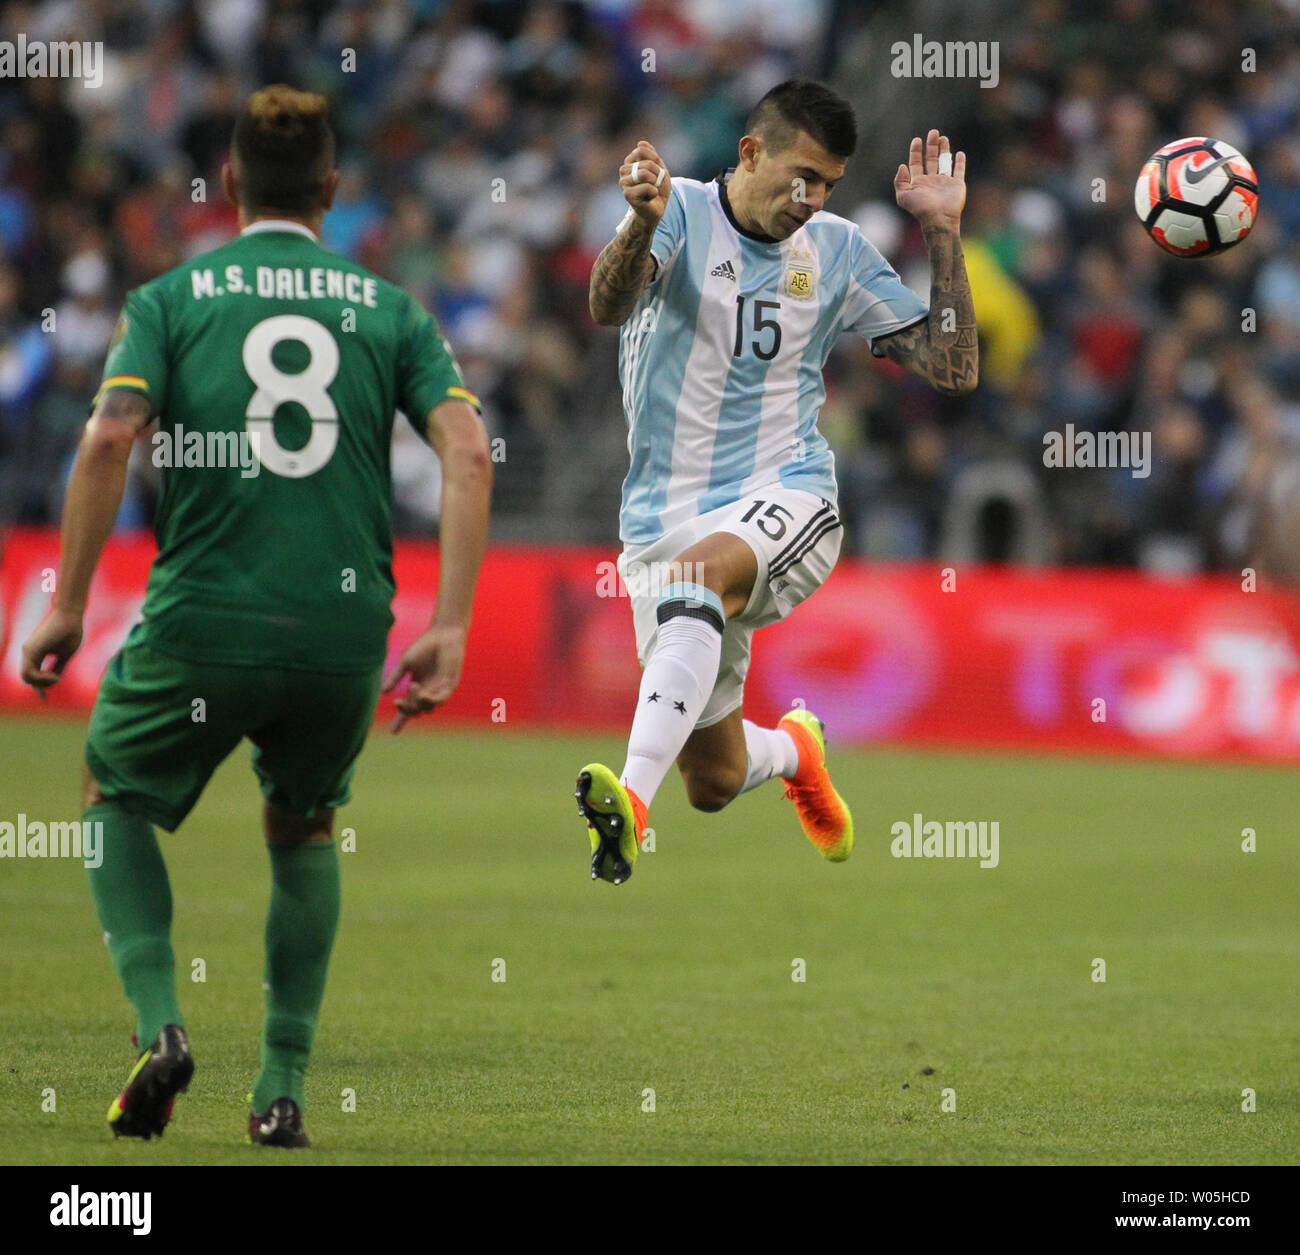 Argentina's Victor Cuesta (15) heads the ball away from Bolivia's Martin Smedberg-Dalence (8) in a 2016 Copa America Centenario soccer match at CenturyLink Field in Seattle, Washington on June 14, 2016.  Argentina beat Bolivia 3-0.   Photo by Jim Bryant/ UPI Stock Photo